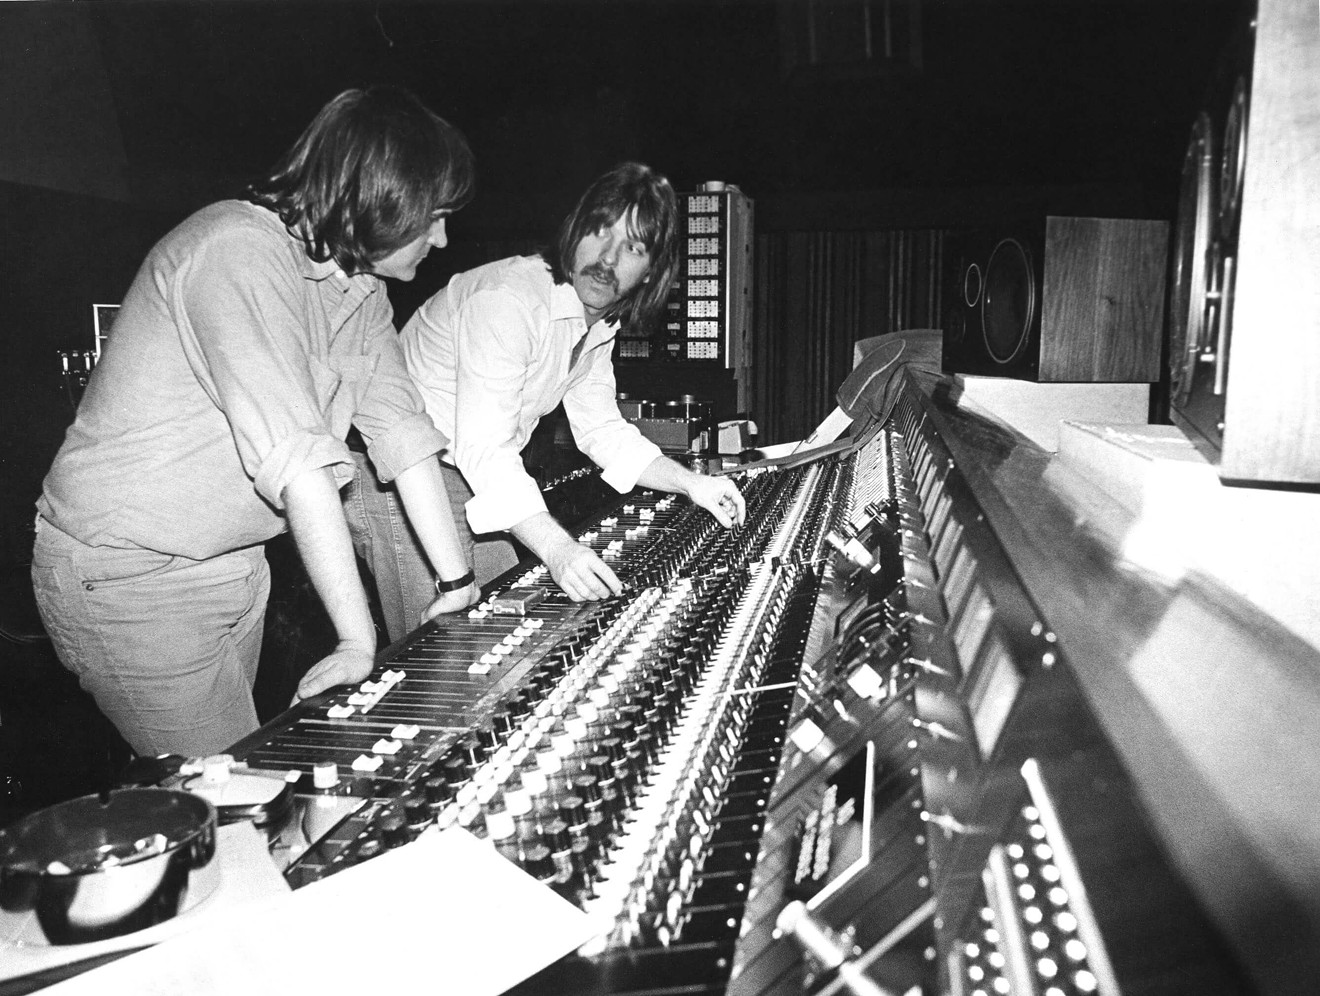 Keith Olsen (left) and his friend, the songwriter, guitarist and producer Jay Graydon, stand at the mixing console inside Davlen Sound Studios in North Hollywood in early 1980. This is where Olsen would produce “Hit Me with Your Best Shot” for Pat Benatar, breaking her career wide open.